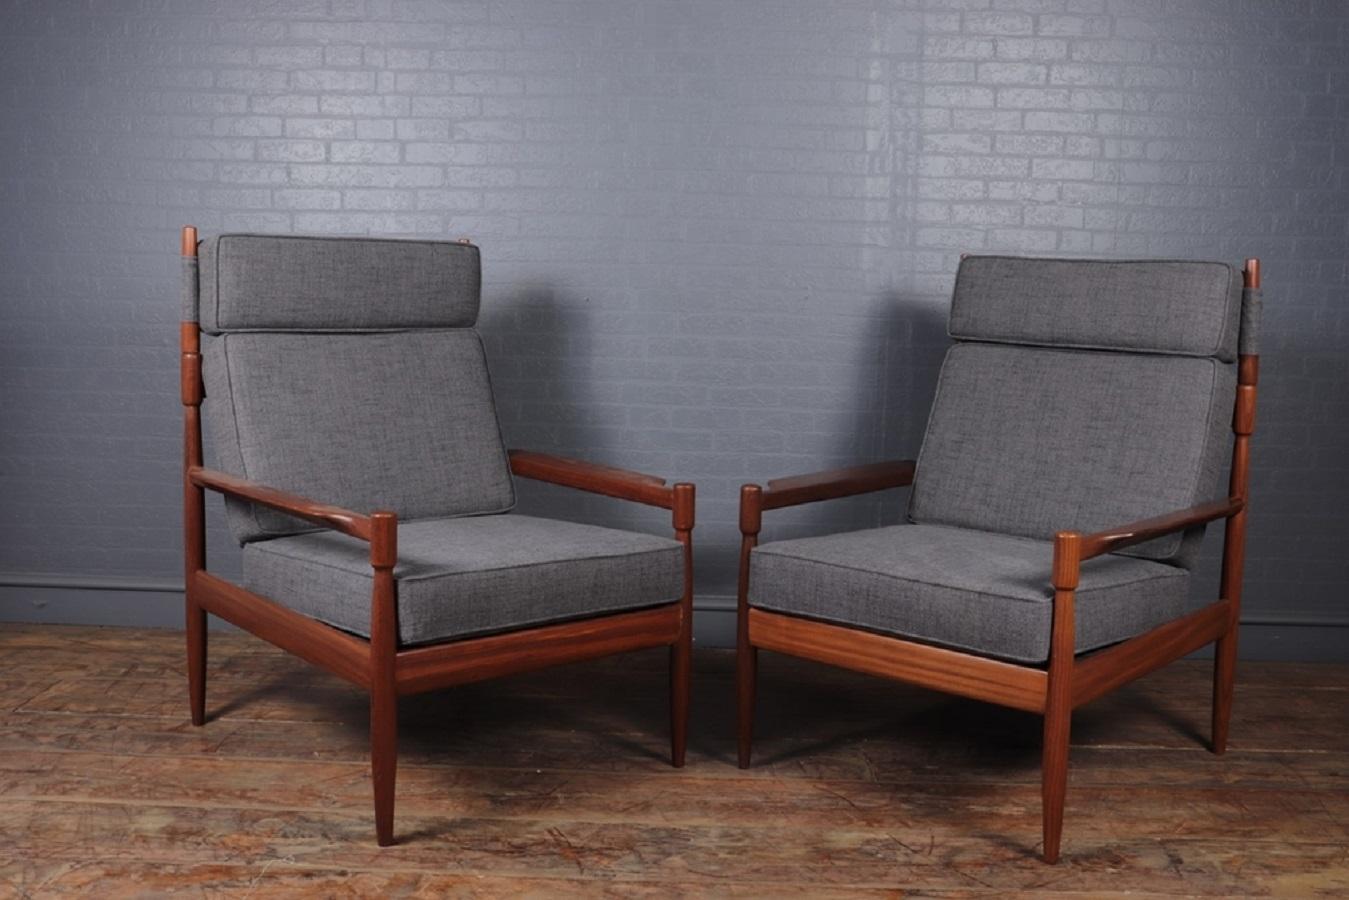 Pair of Danish Midcentury Teak Armchairs, c.1960 In Good Condition For Sale In London, GB